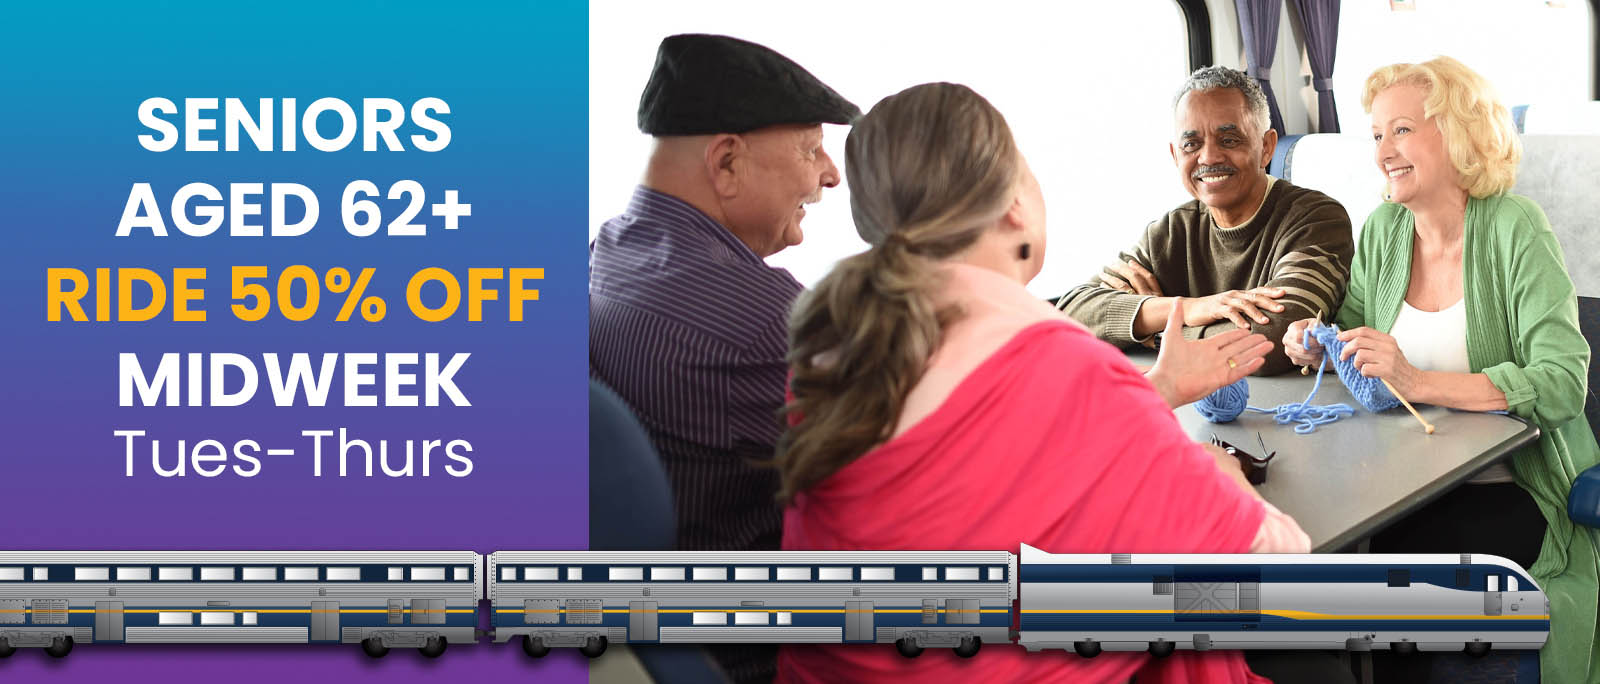 Half-off fares for seniors age 62 and over